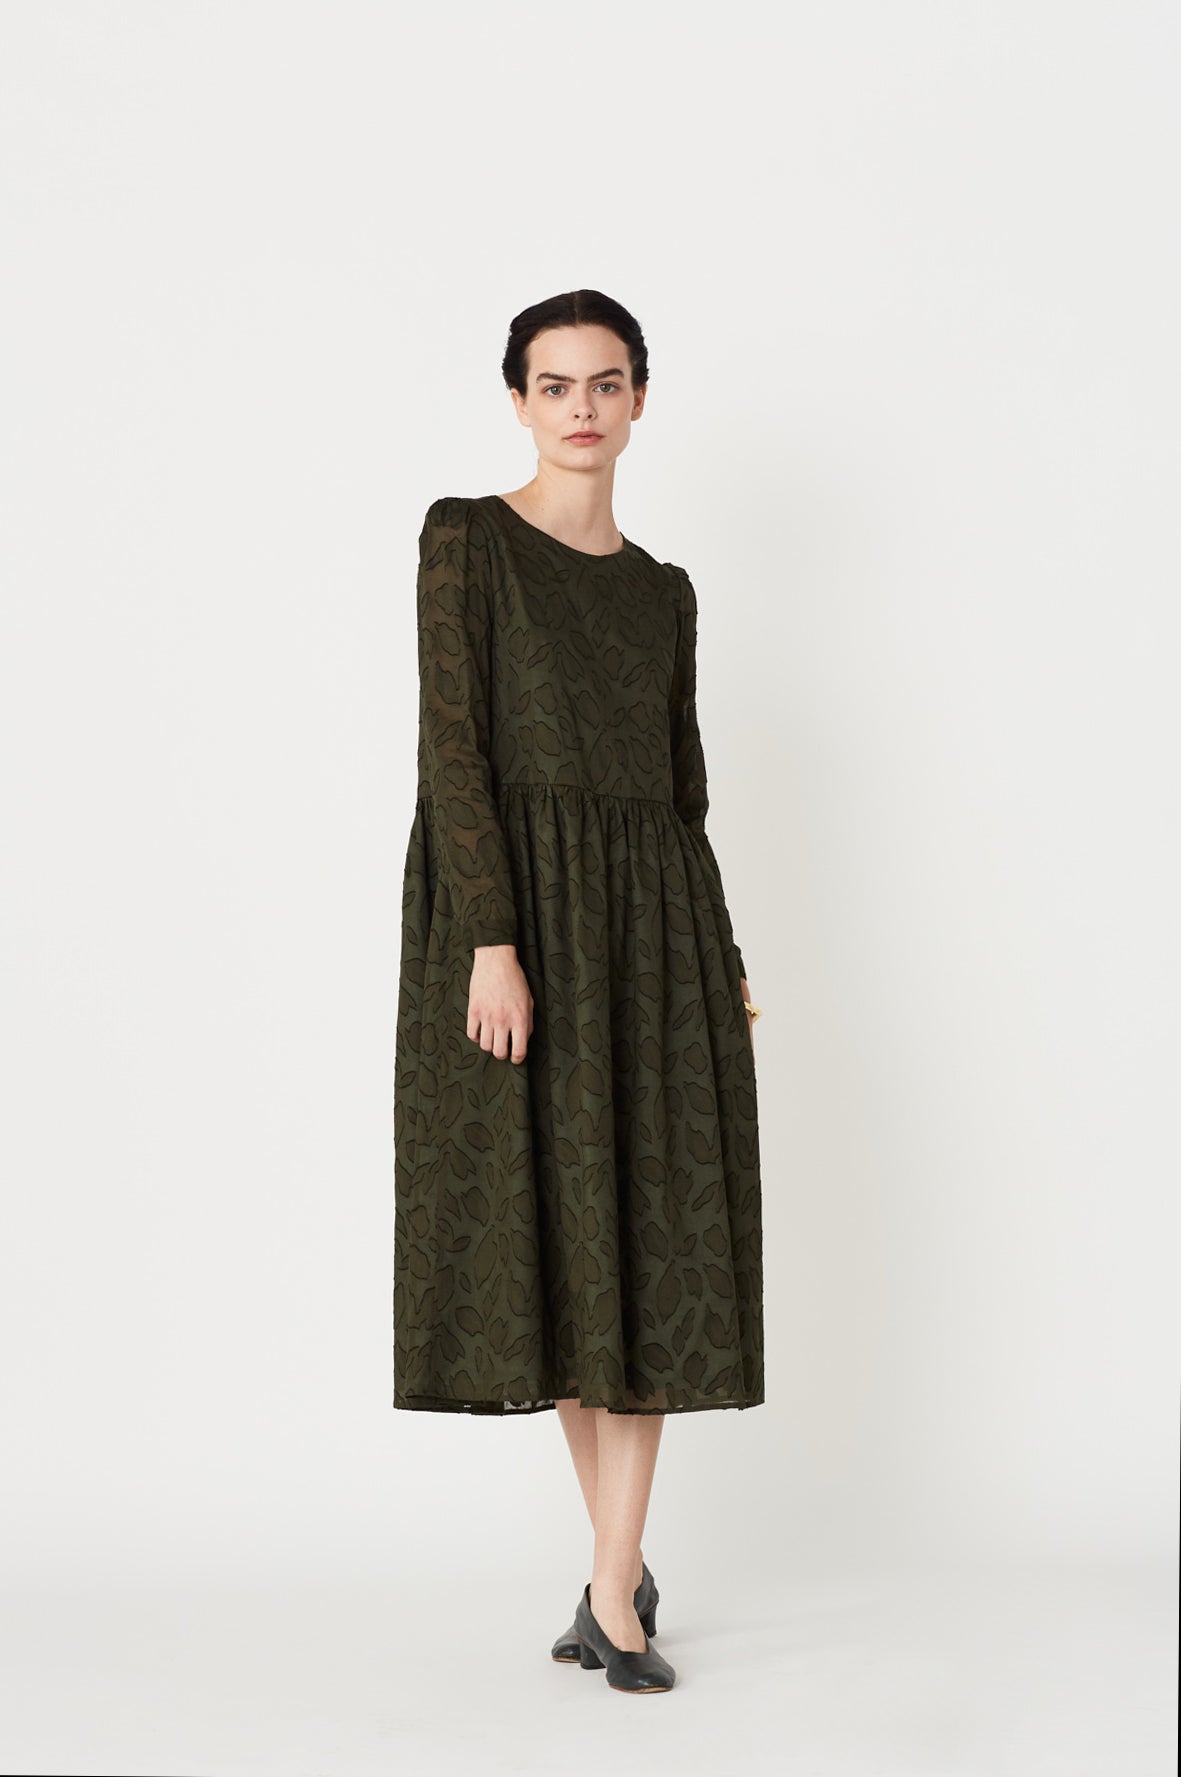 Ingrid Dress in Forest Green Cotton Leaf Jacquard. Made in Atlanta, ethically and sustainably, by slow fashion designer Megan Huntz. 